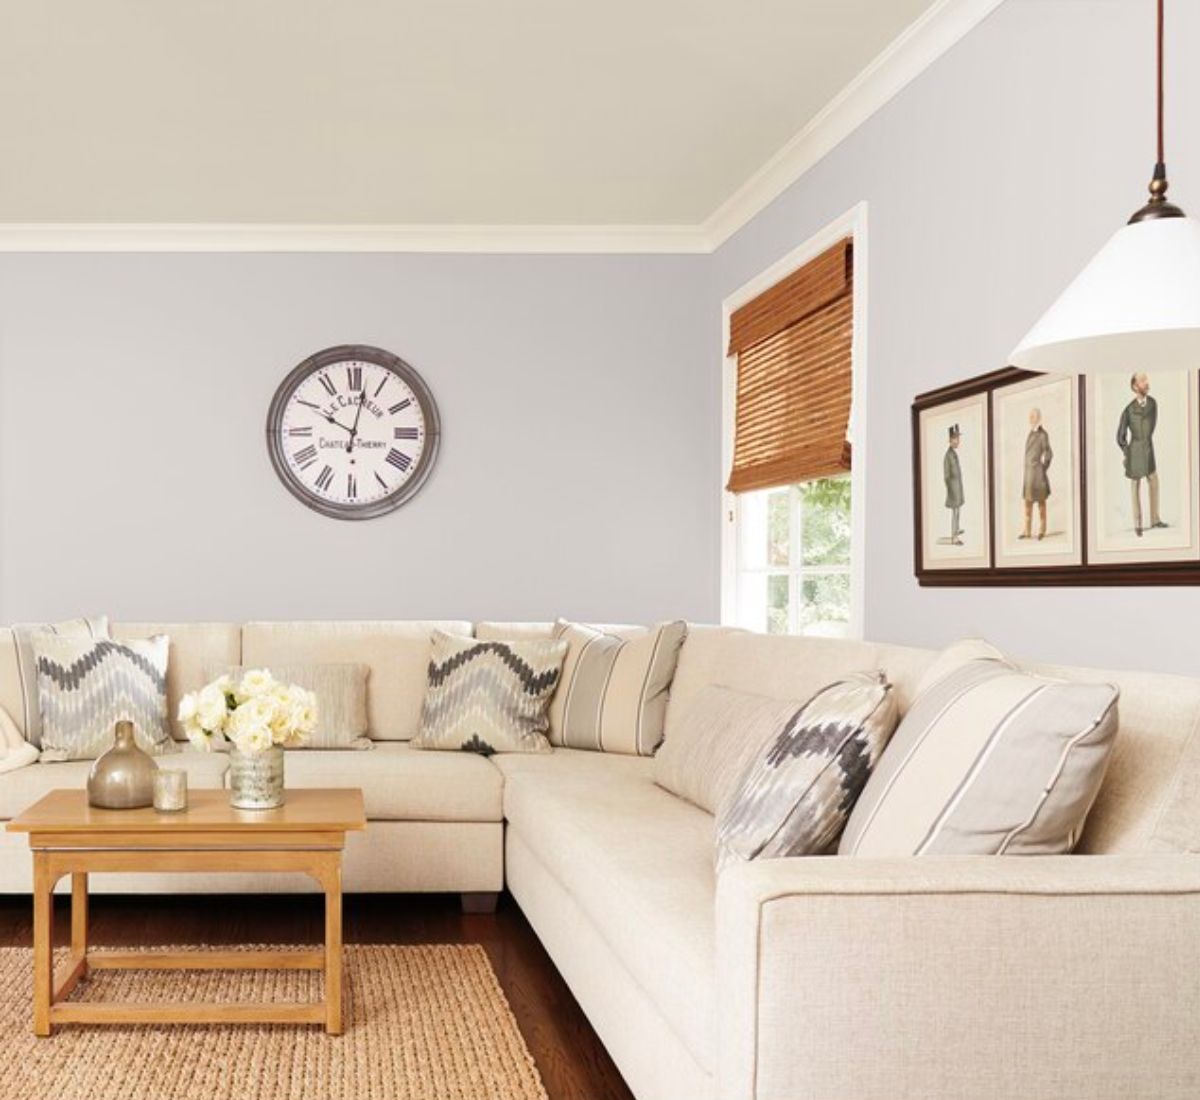 A living room with a sectional couch and walls painted with Sherwin Williams Grayish. A clock hung on the wall and wall art.